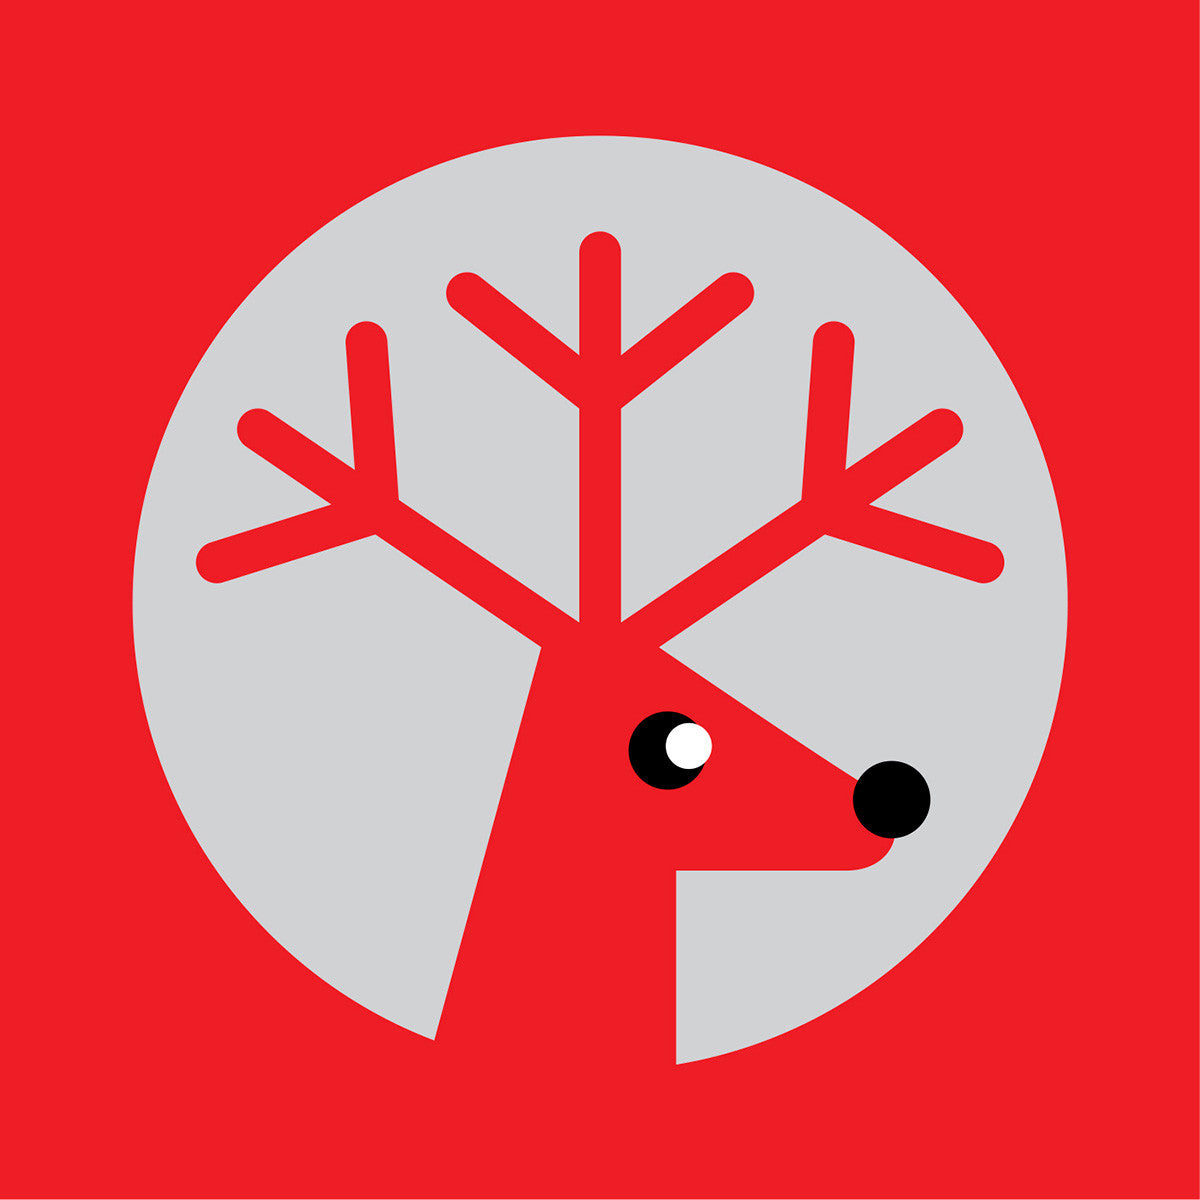 Silver reindeer on red Christmas card